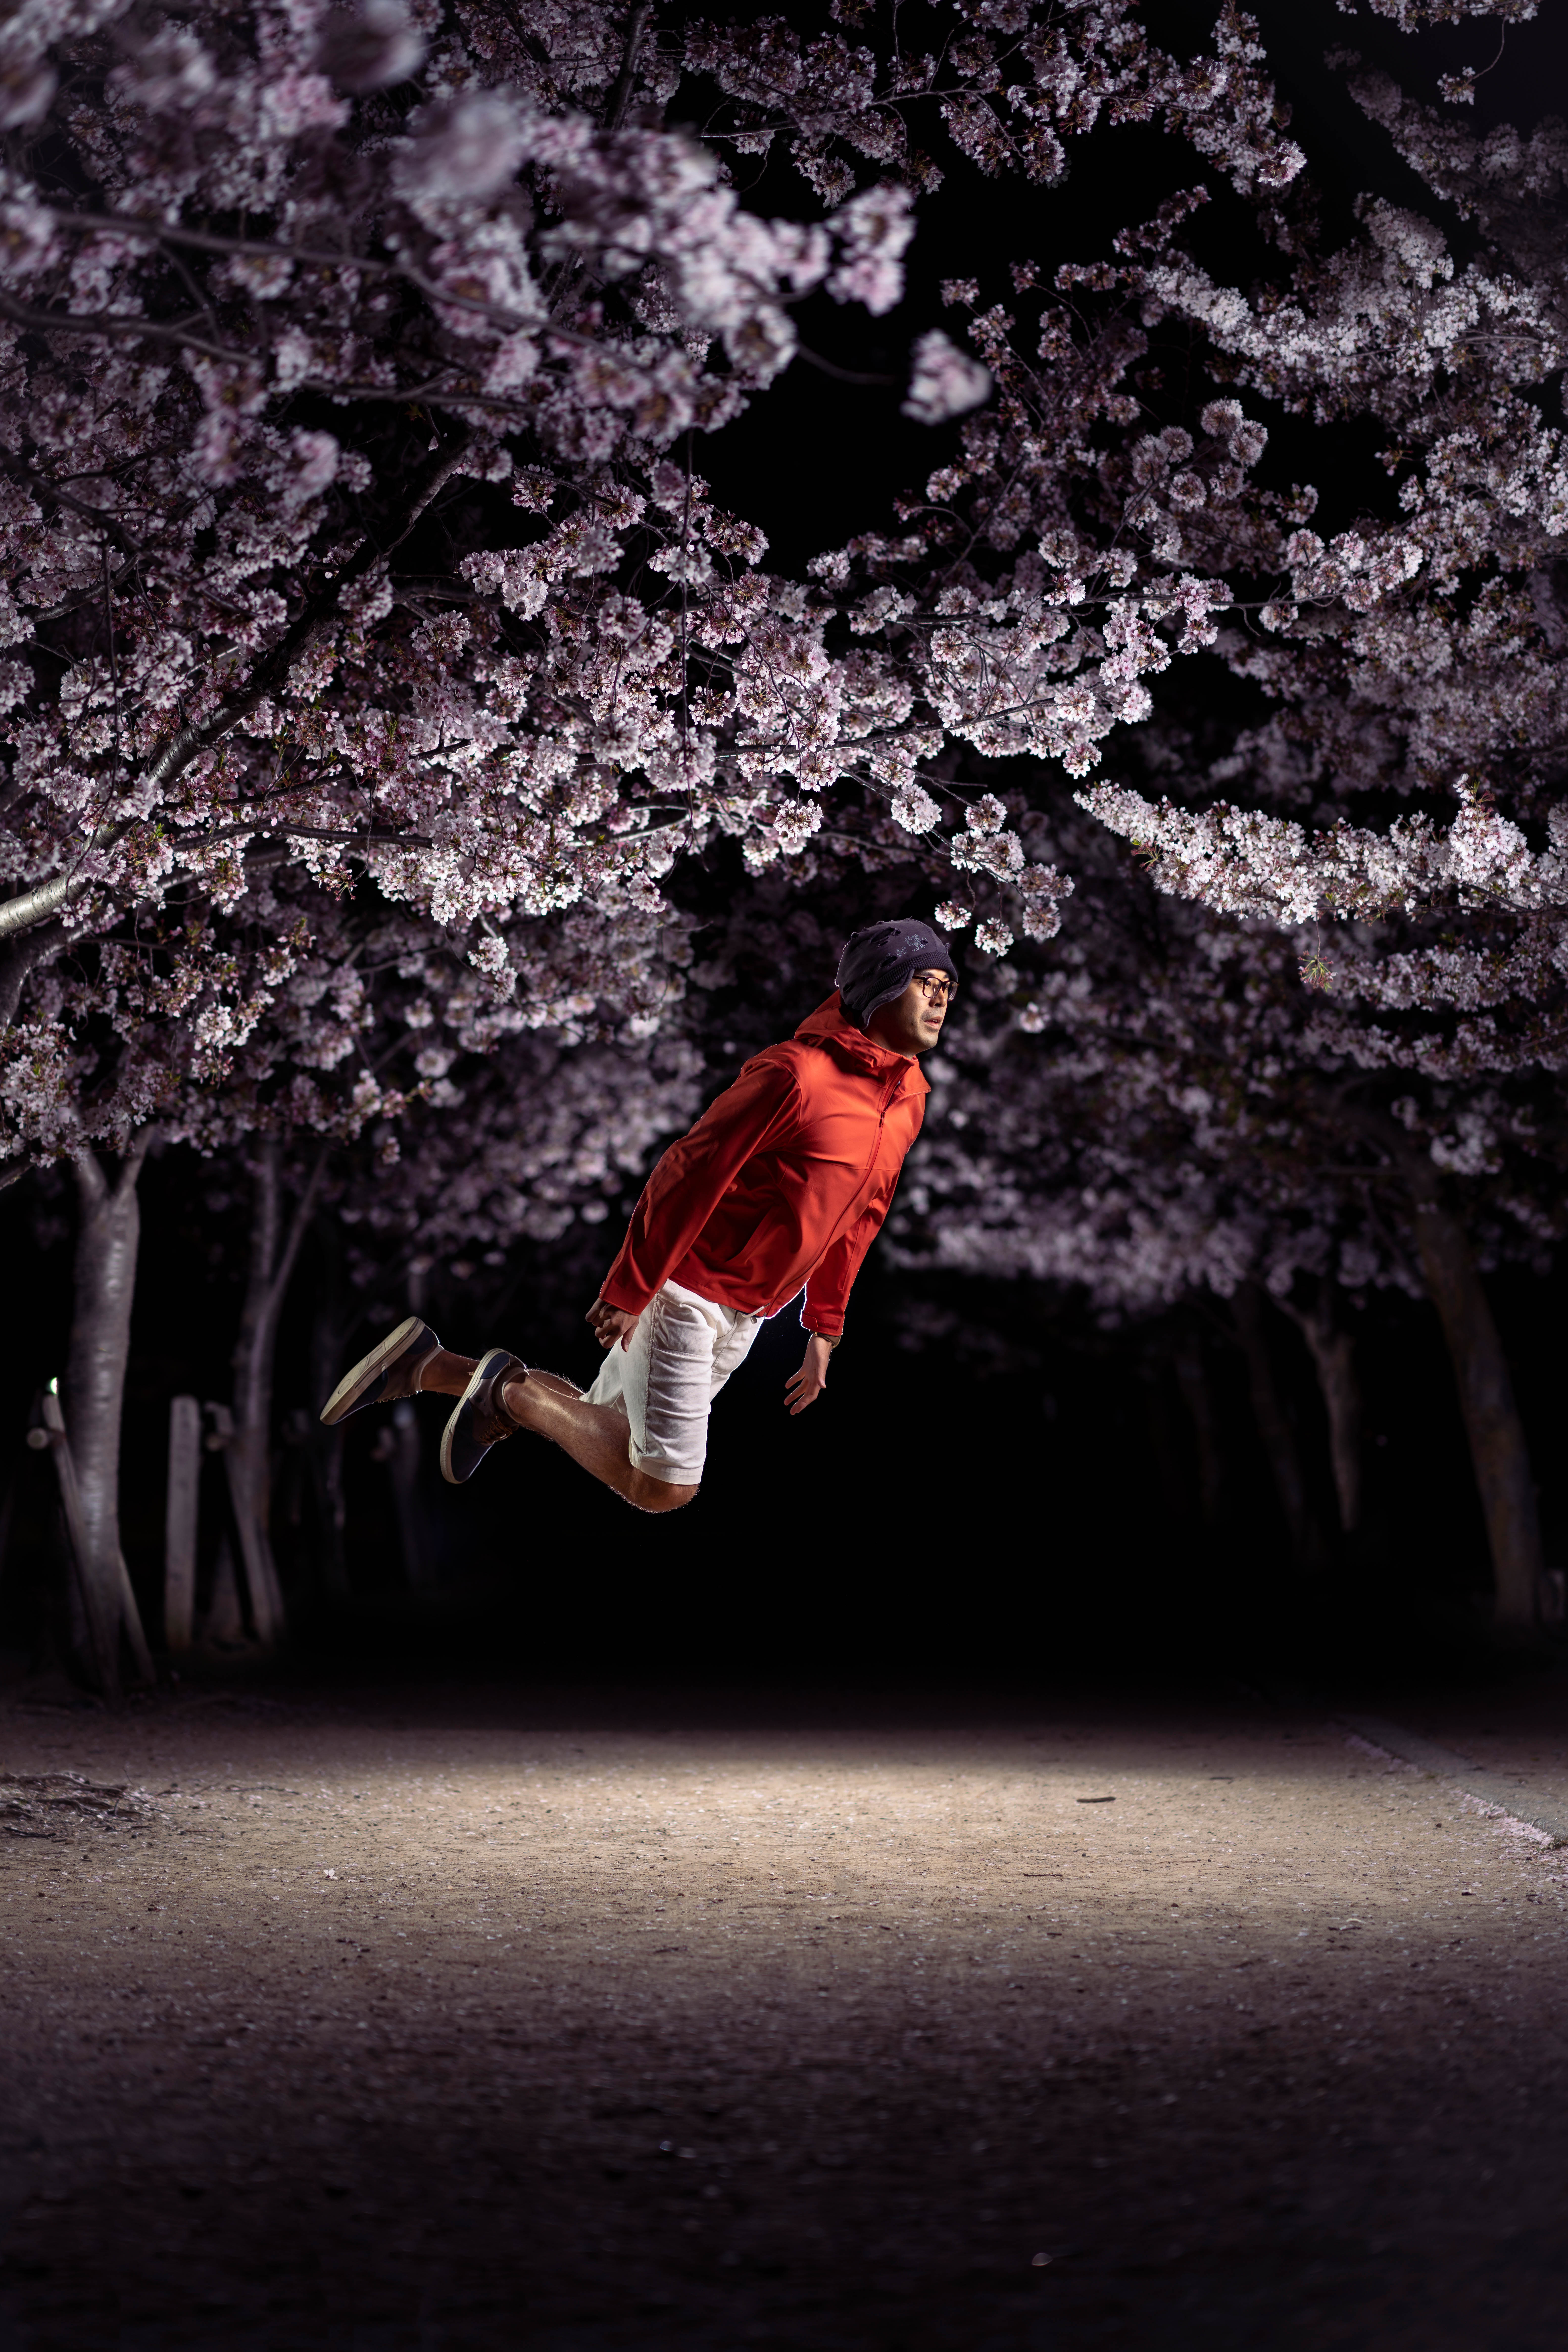 A man jumps in front of cherry blossoms.